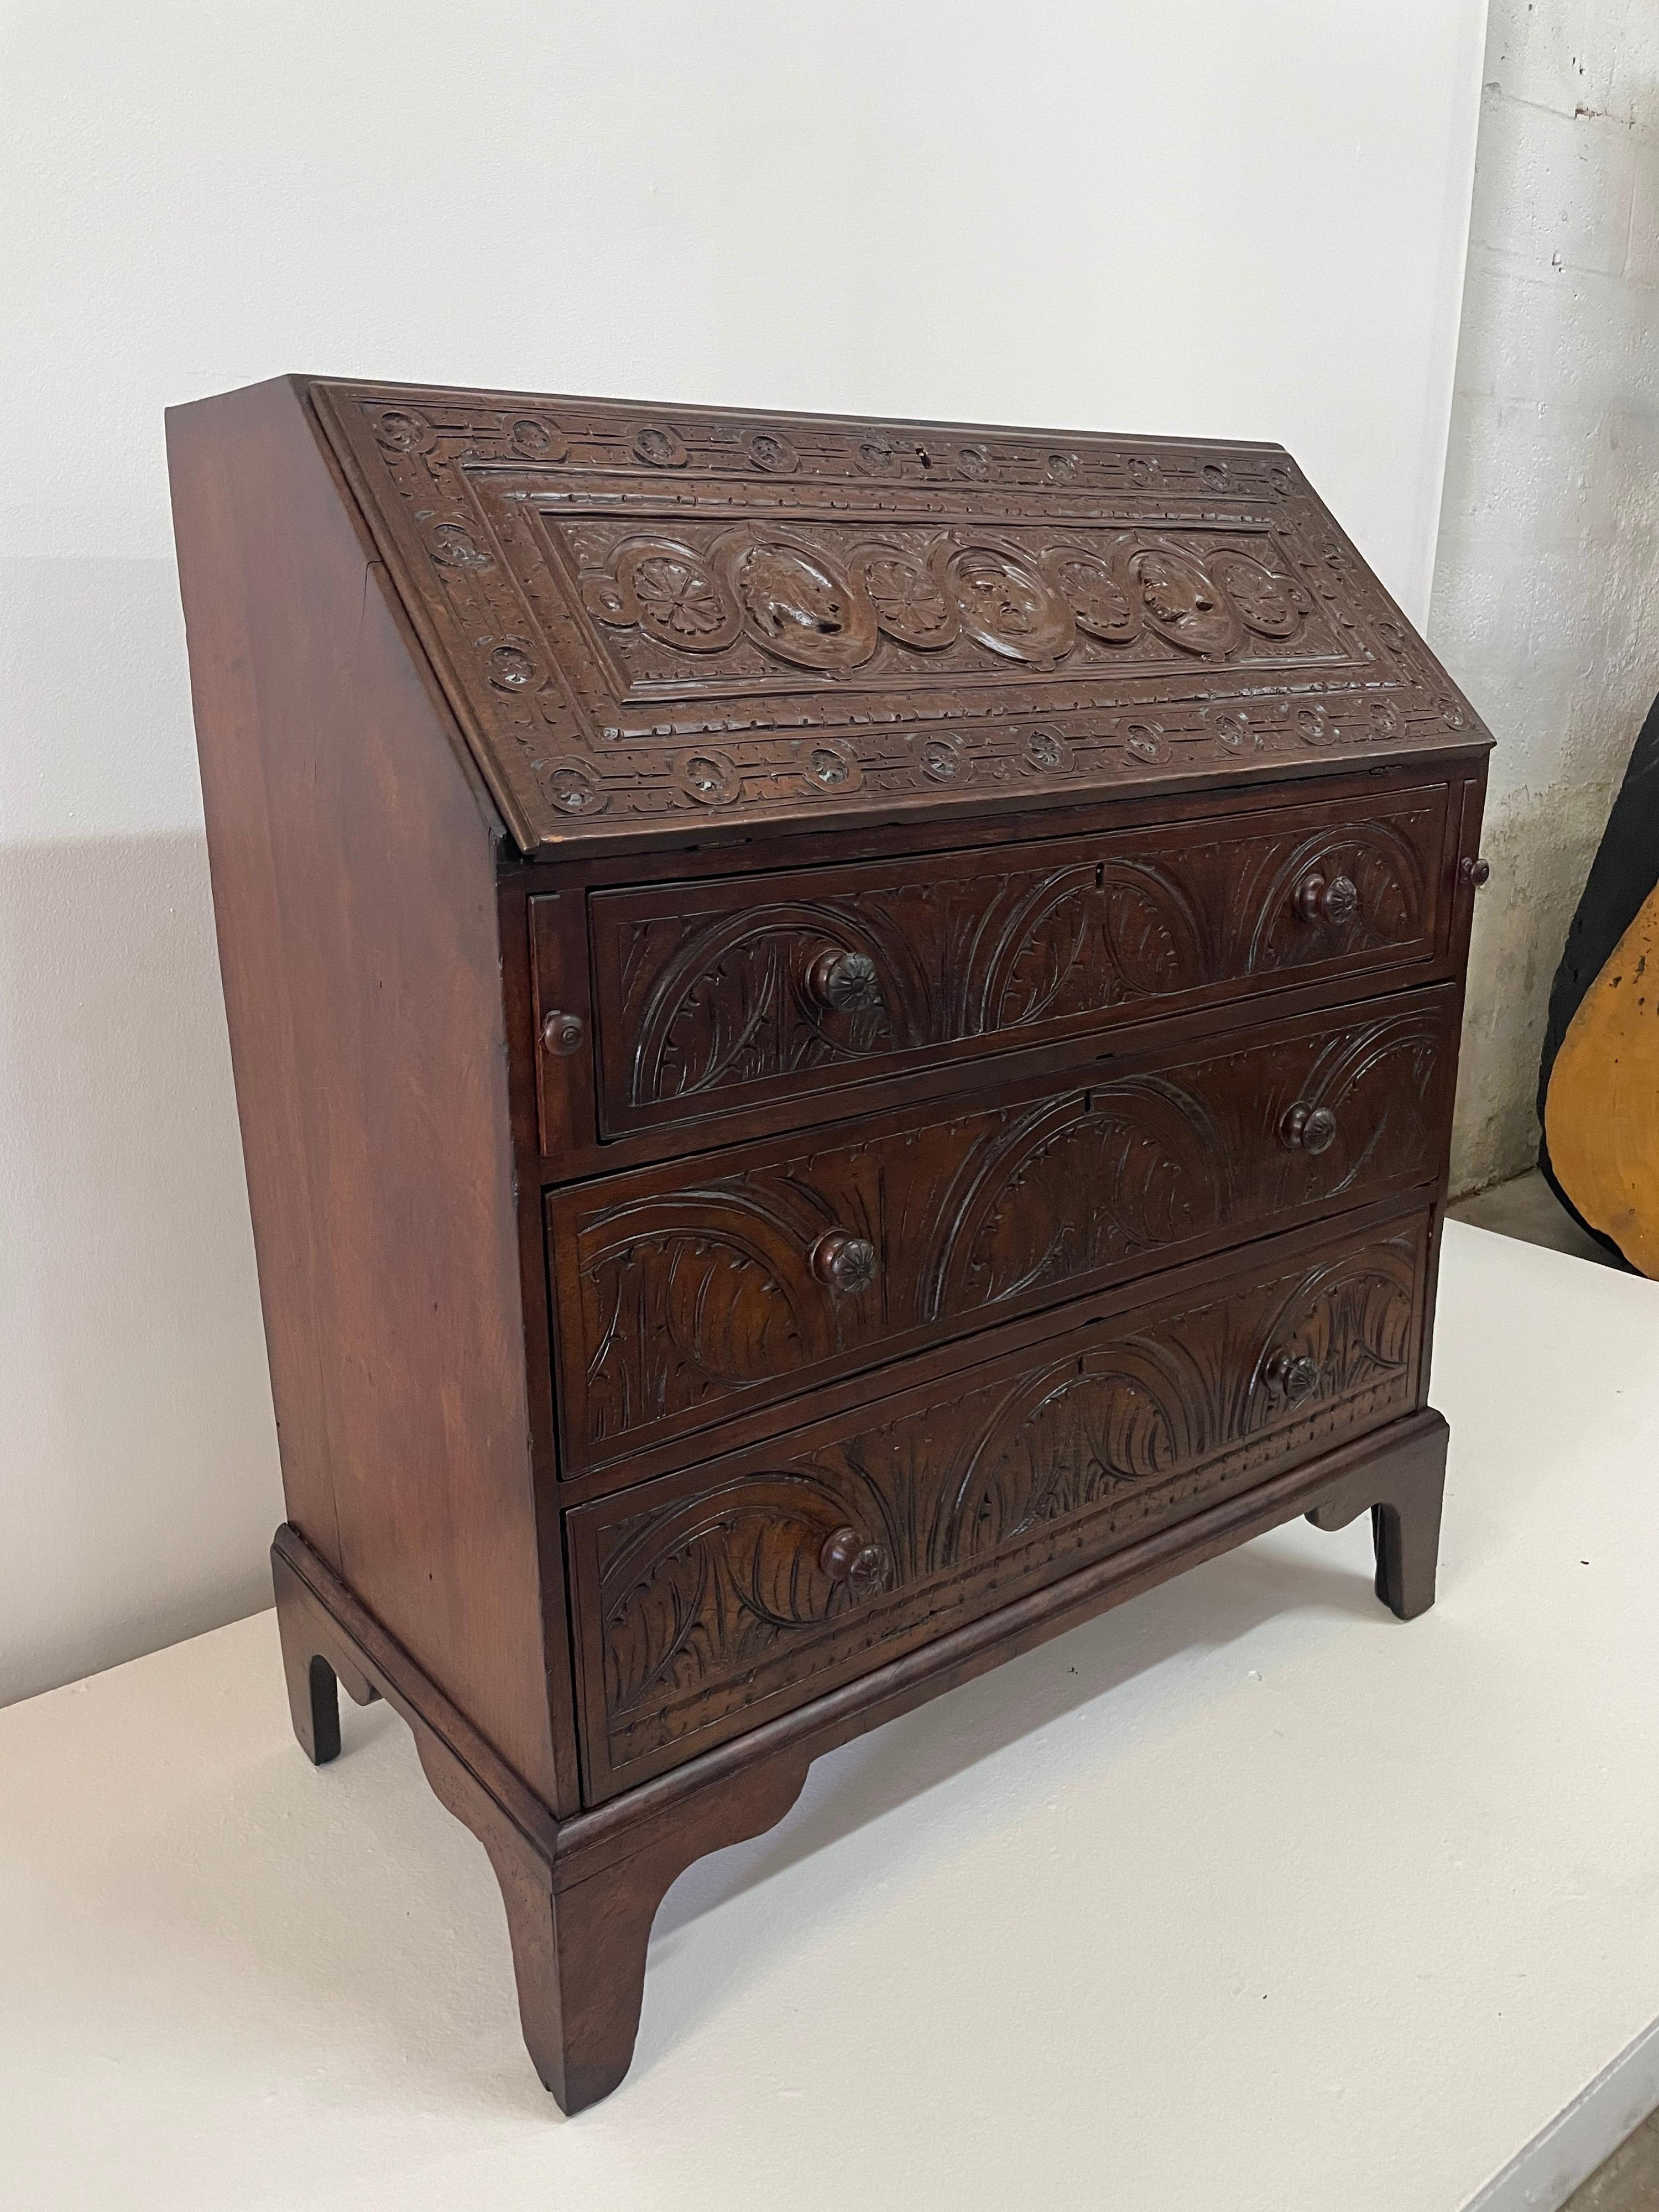 British Colonial English Fall-Front Secretary Desk in Carved Oak, Circa 1800 For Sale